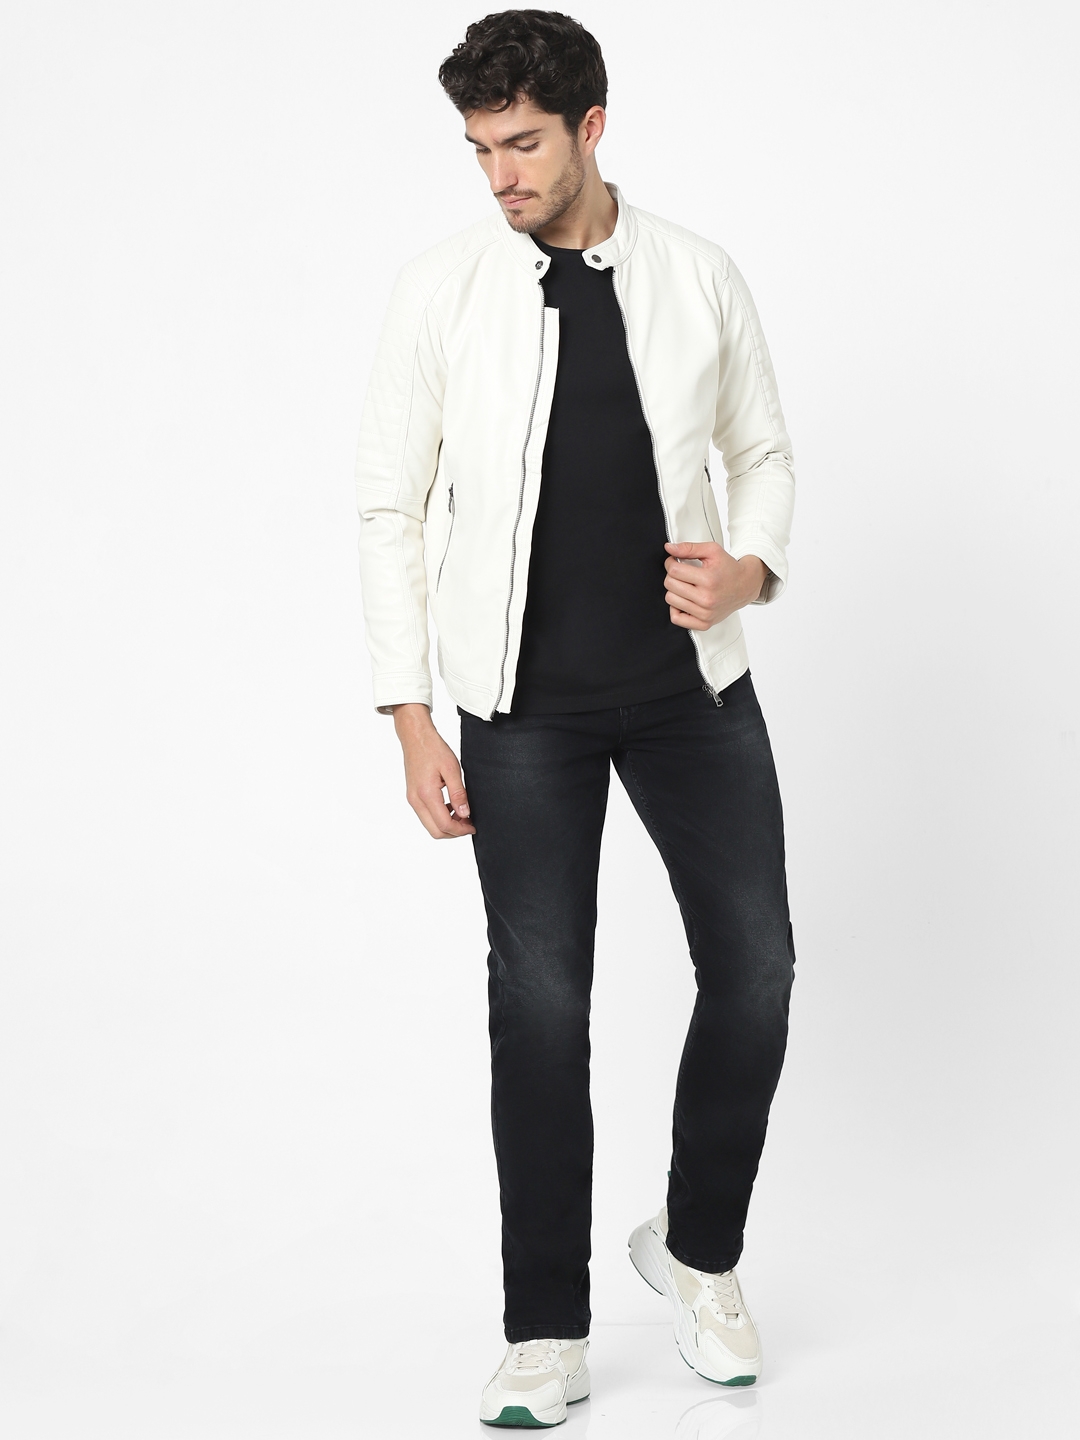 Men's White Solid Leather Jackets